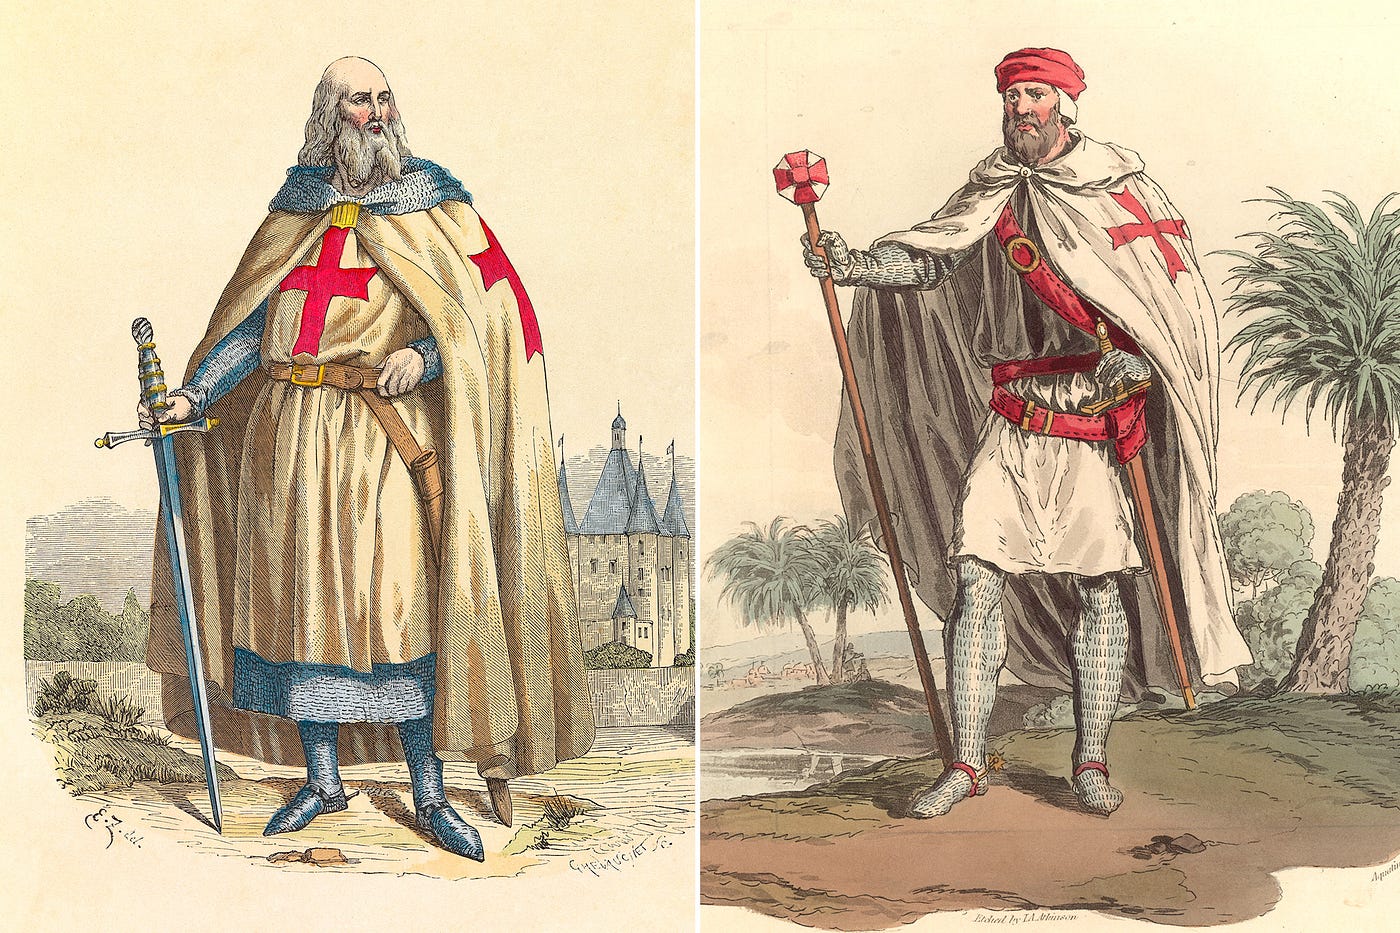 The Powerful Curse of Jacques de Molay, the Last Grand Master of